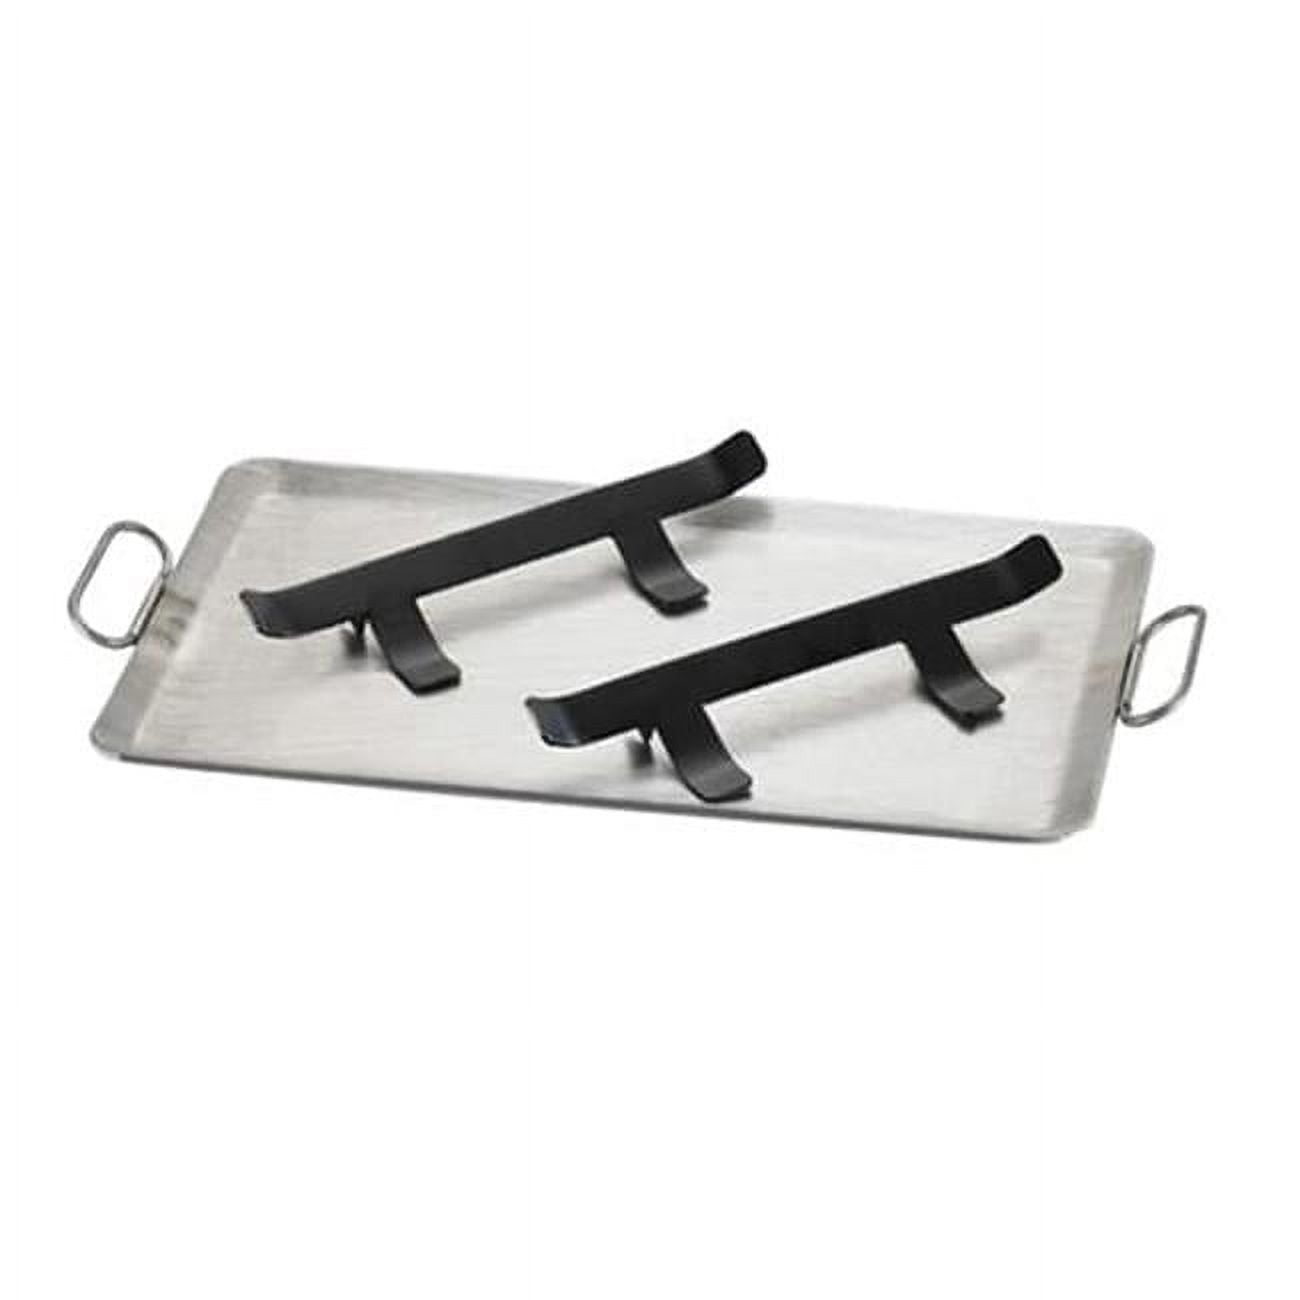 Picture of Cal Mil 1362 Cook-N-Serve Griddle Plate with Brackets - 22.75 x 13.75 x 2.25 in.